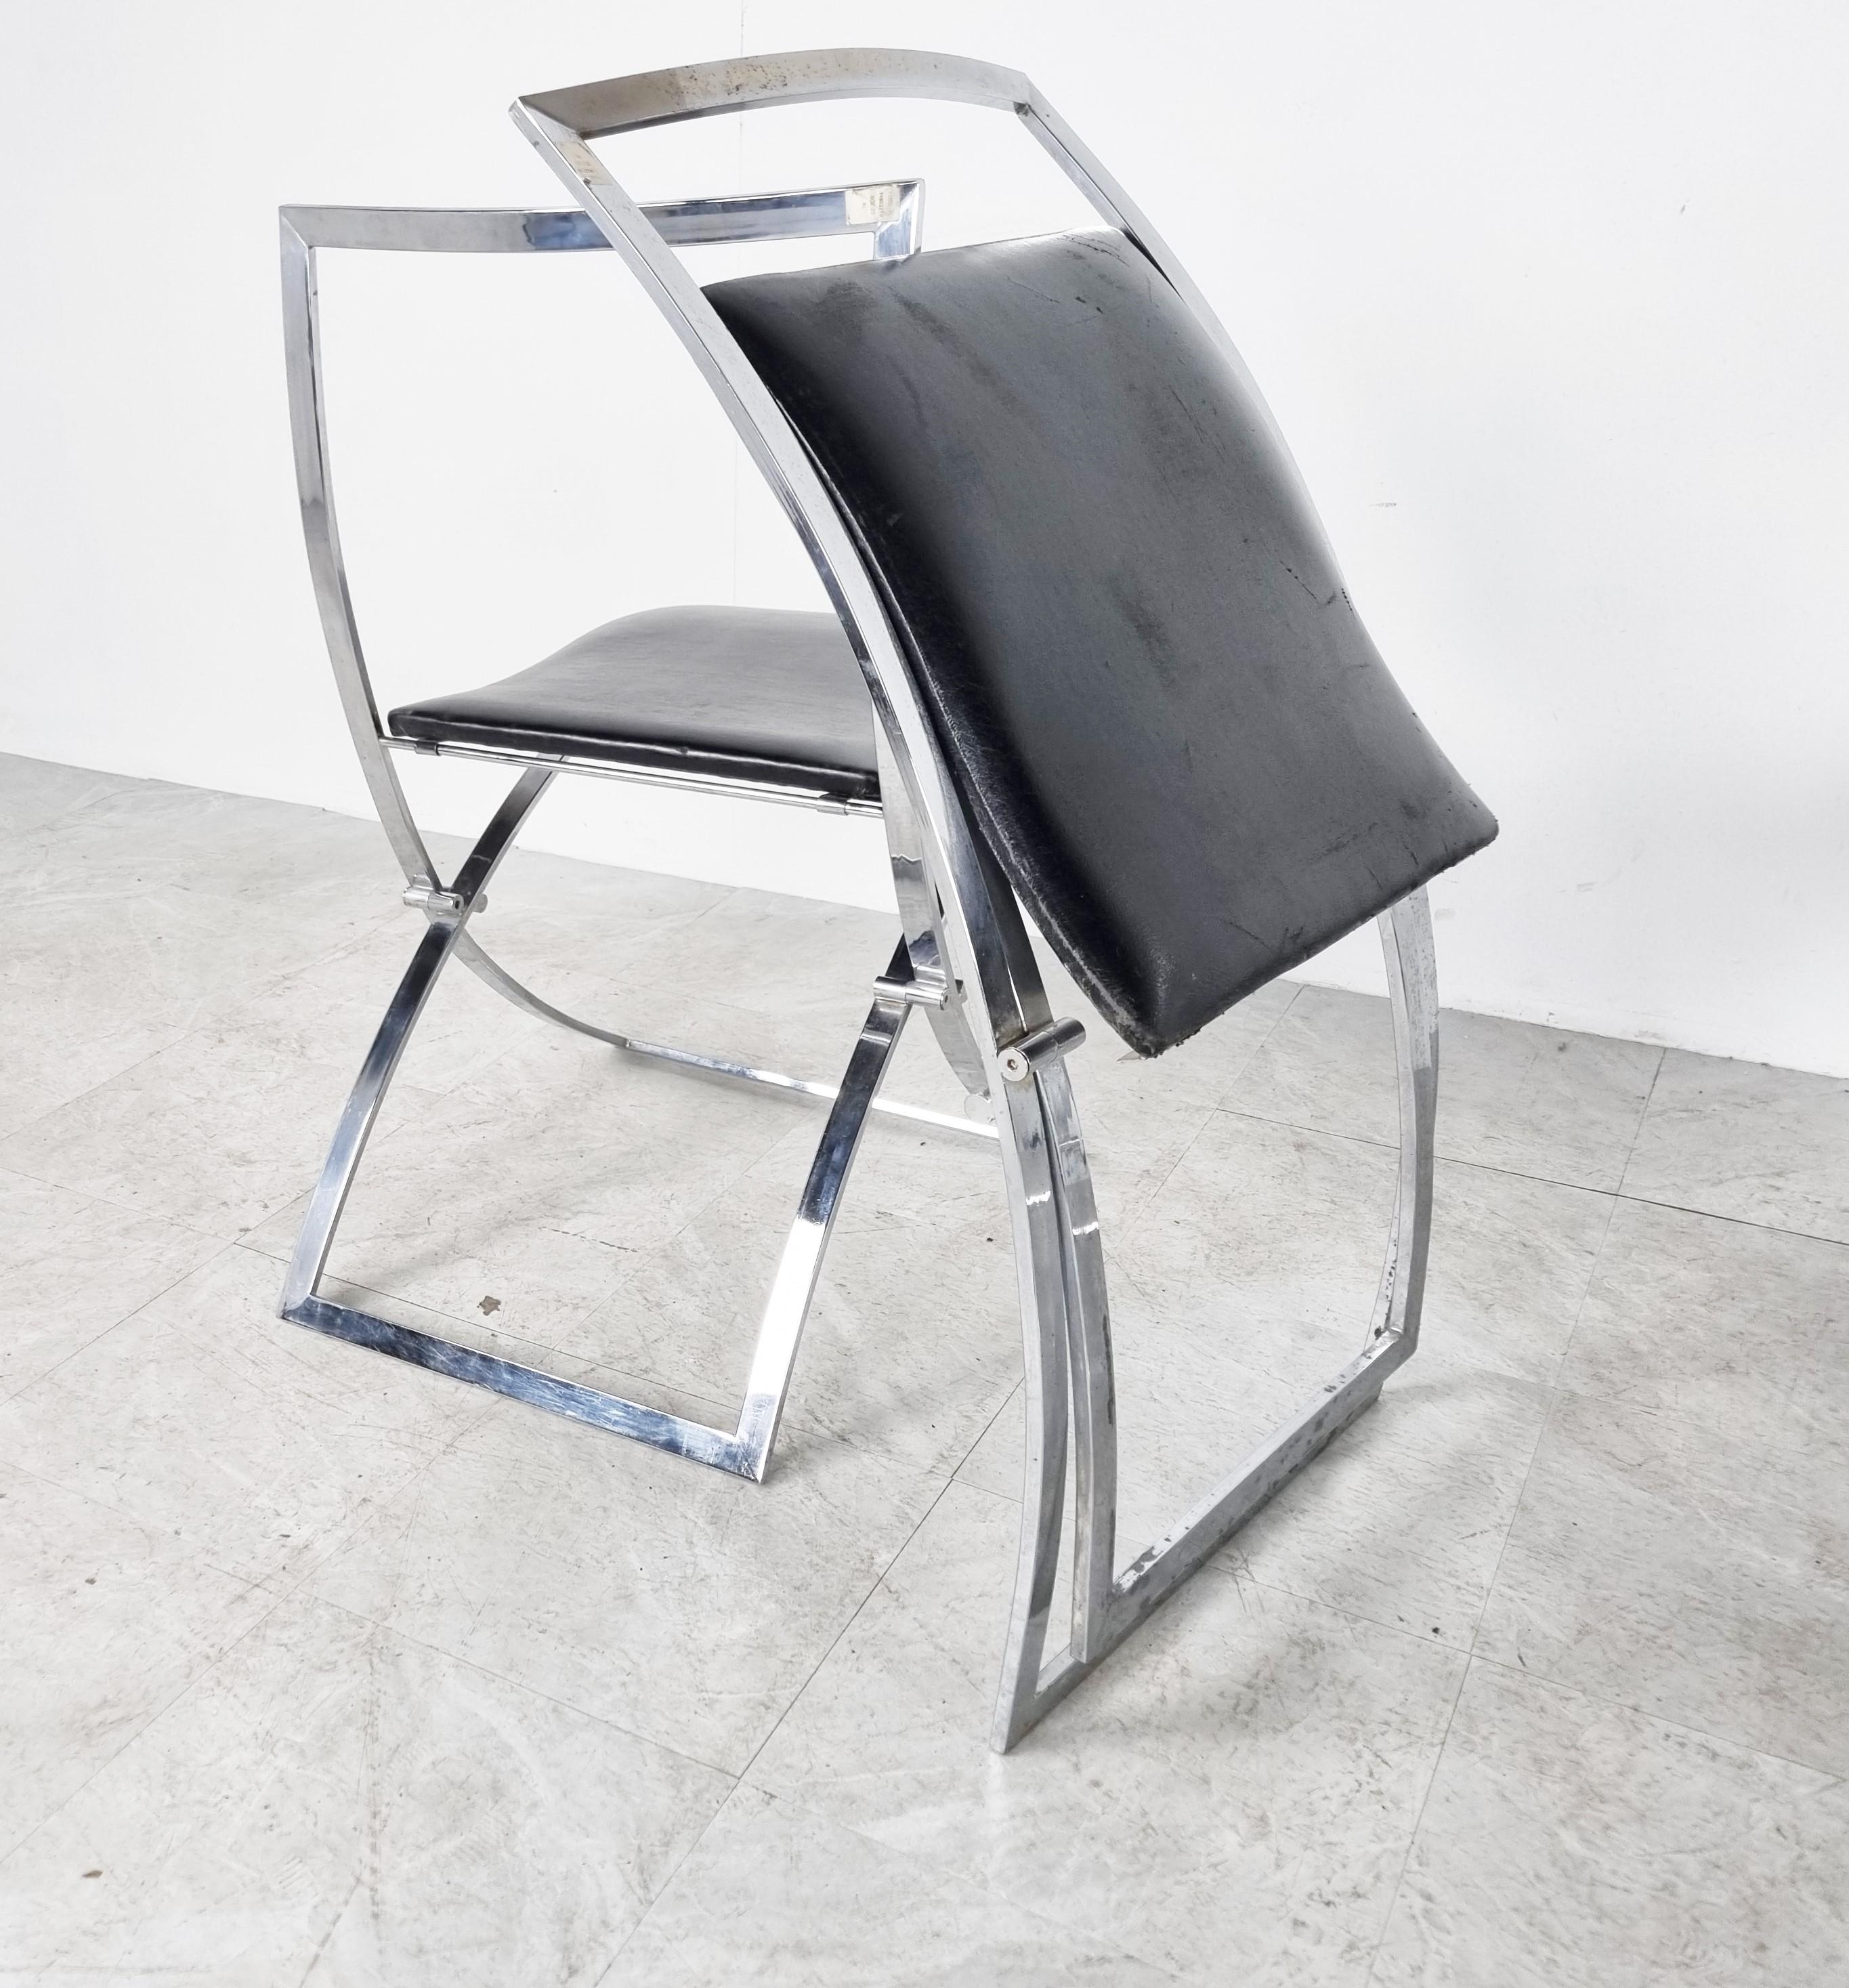 Italian chromed foldable dining chairs designed by Marcello Cuneo for Mobel. Model Luisa

Untouched original condition with normal age related wear. Two chairs have some corrosion marks, but have been polished so it's smooth.
The upholstery of